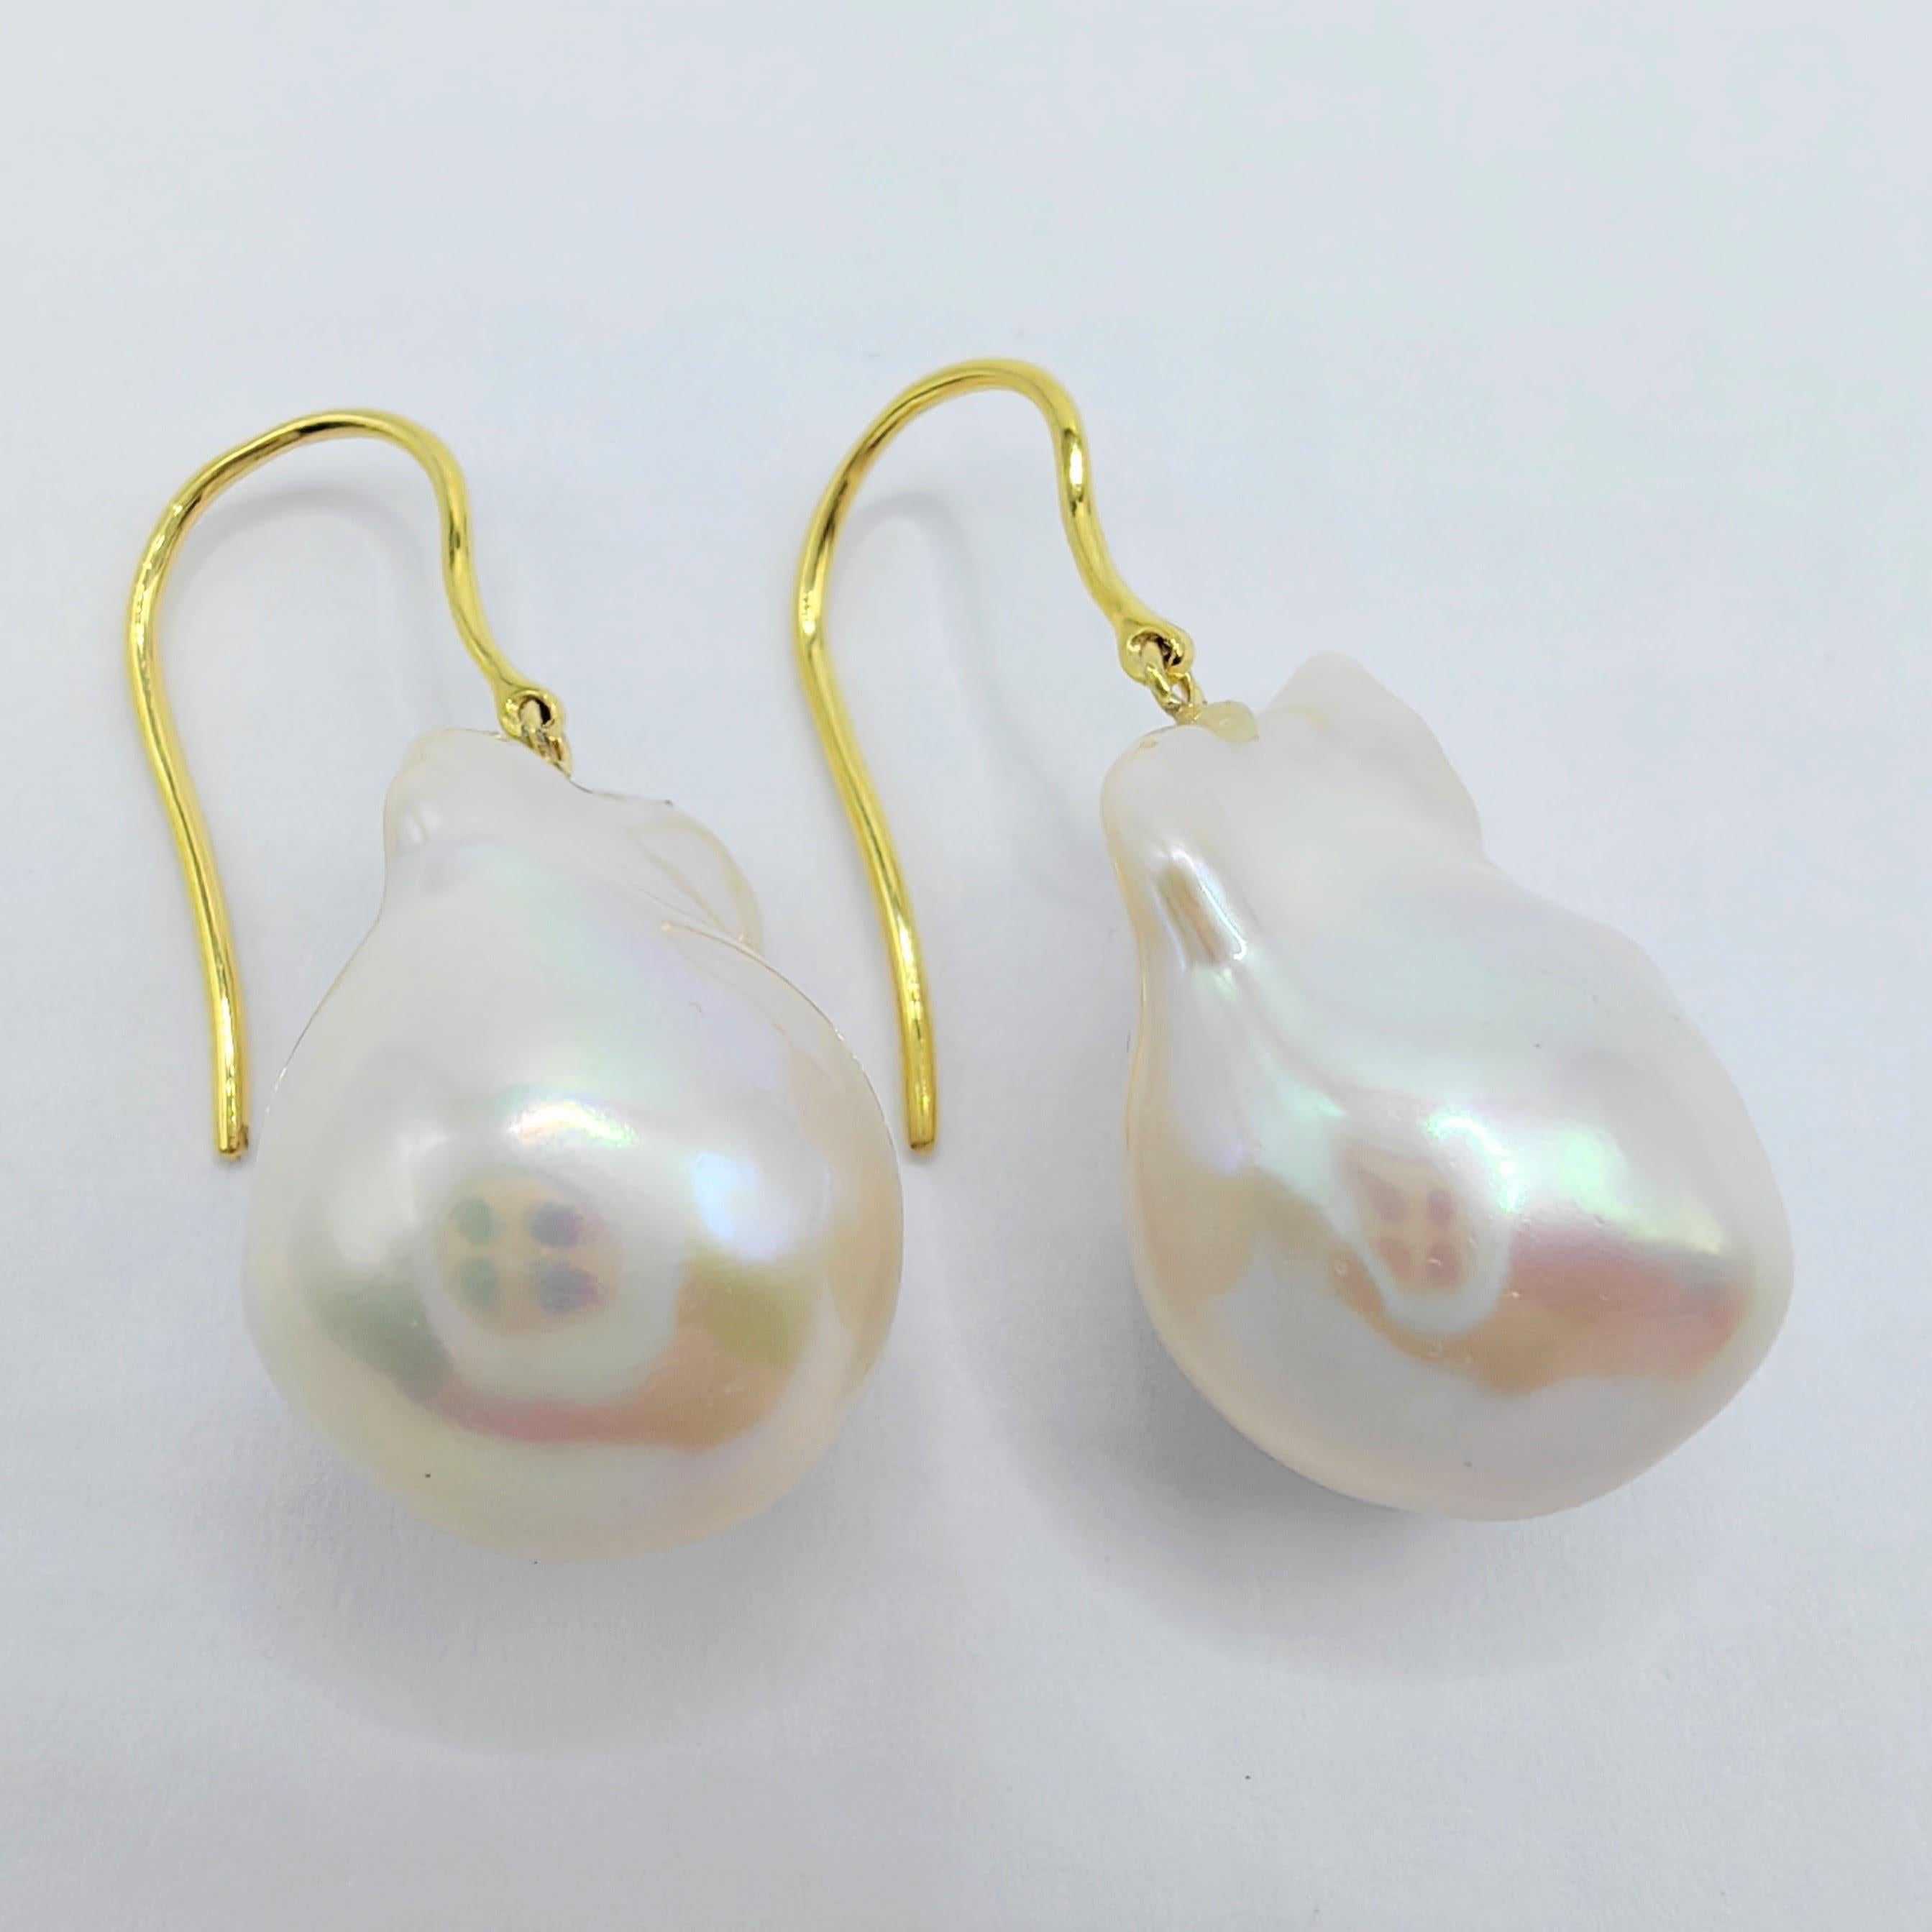 Iridescent Baroque Pearl Drop Earrings With 18K Yellow Gold French Hooks 1